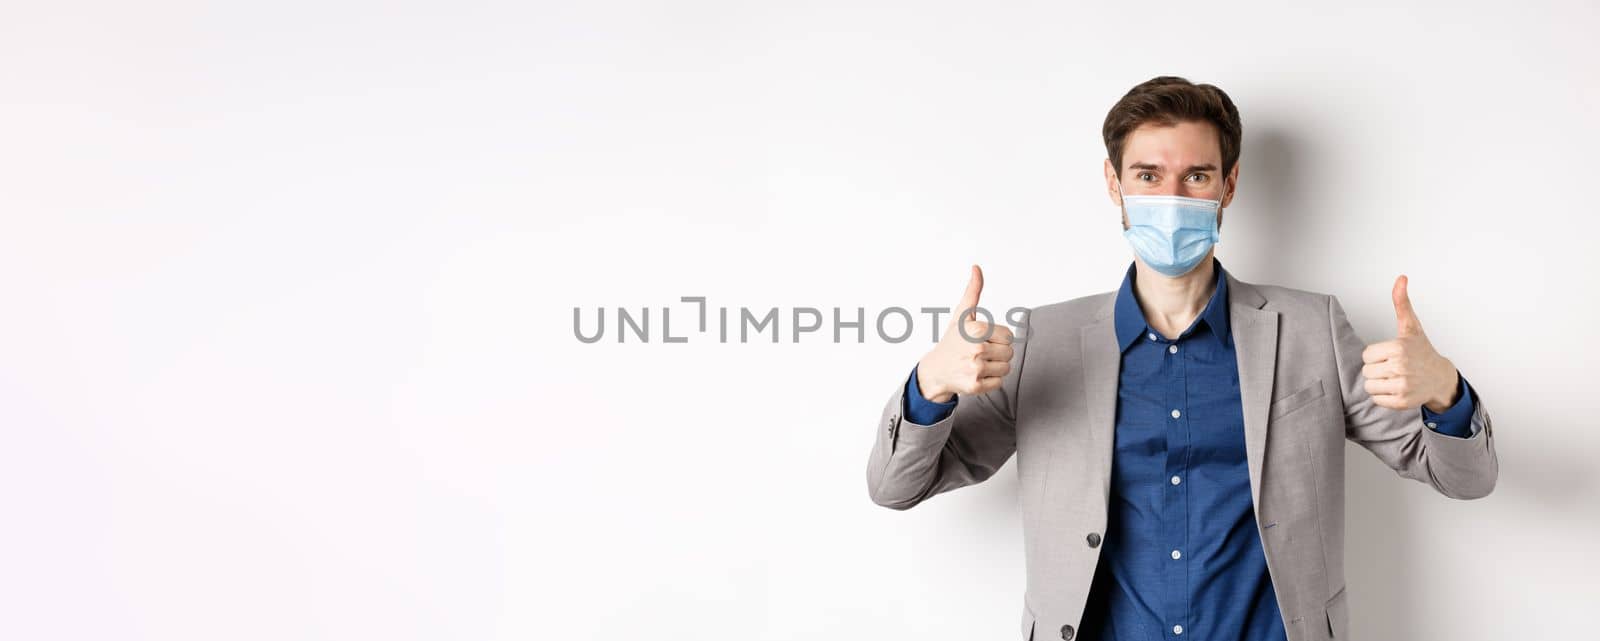 Covid-19, pandemic and business concept. Cheerful man in suit and medical mask using preventive measures in office, showing thumbs up, white background.